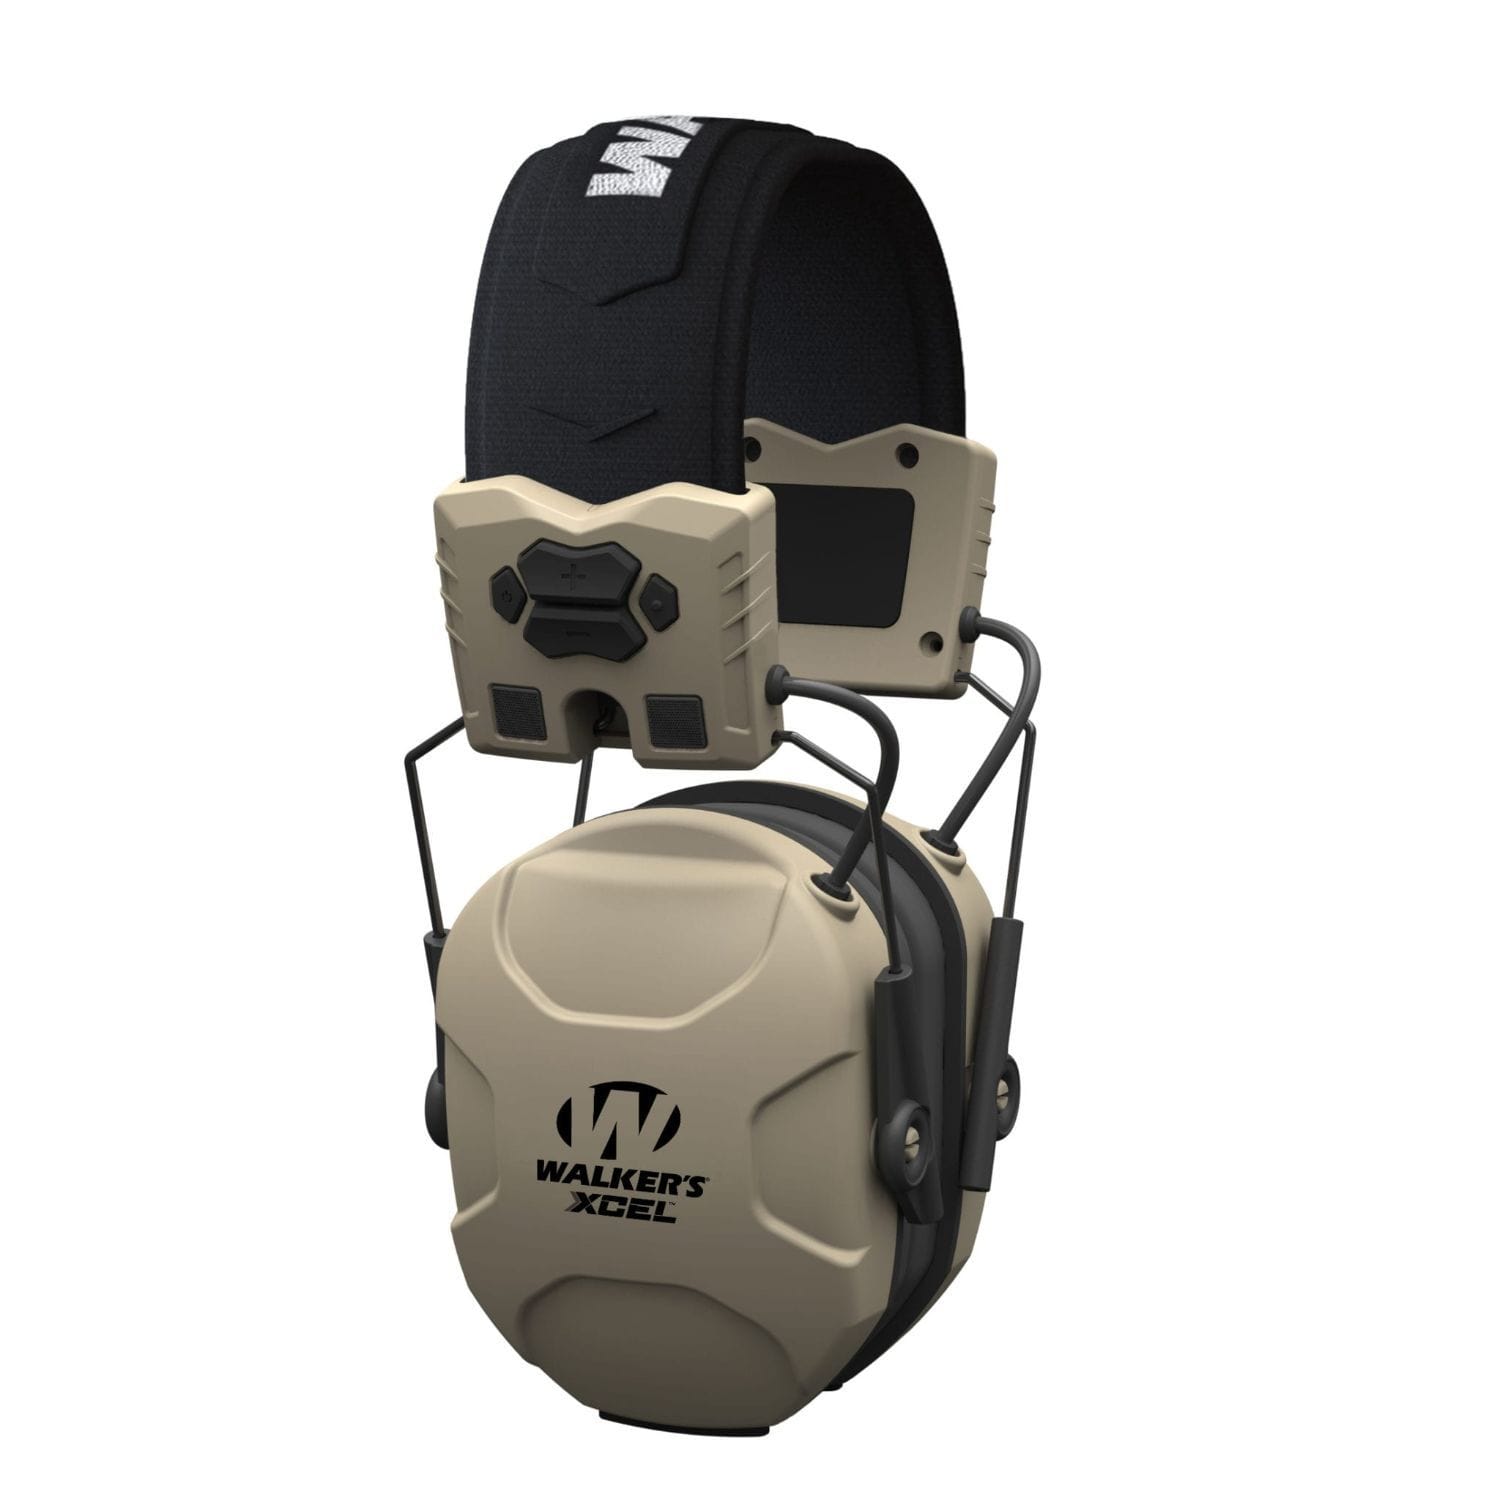 GSM Outdoors Public Safety/L.E. : Hearing Protection Walkers XCEL Digital Electronic Muff with Voice Clarity